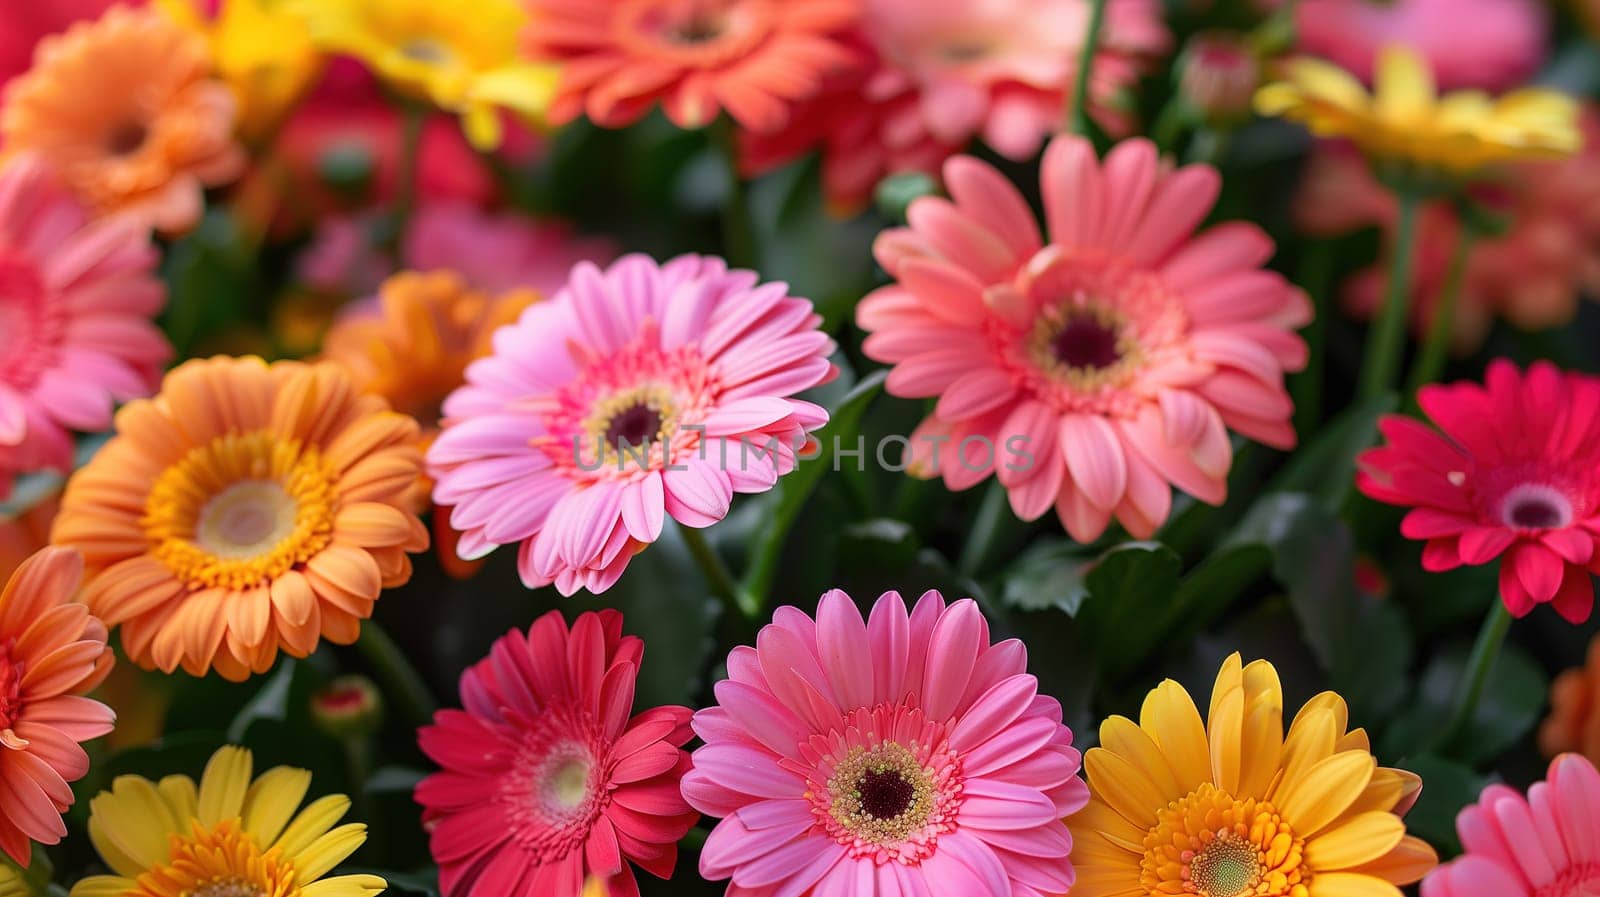 Vibrant Colorful Flowers in Close-up Shot by TRMK